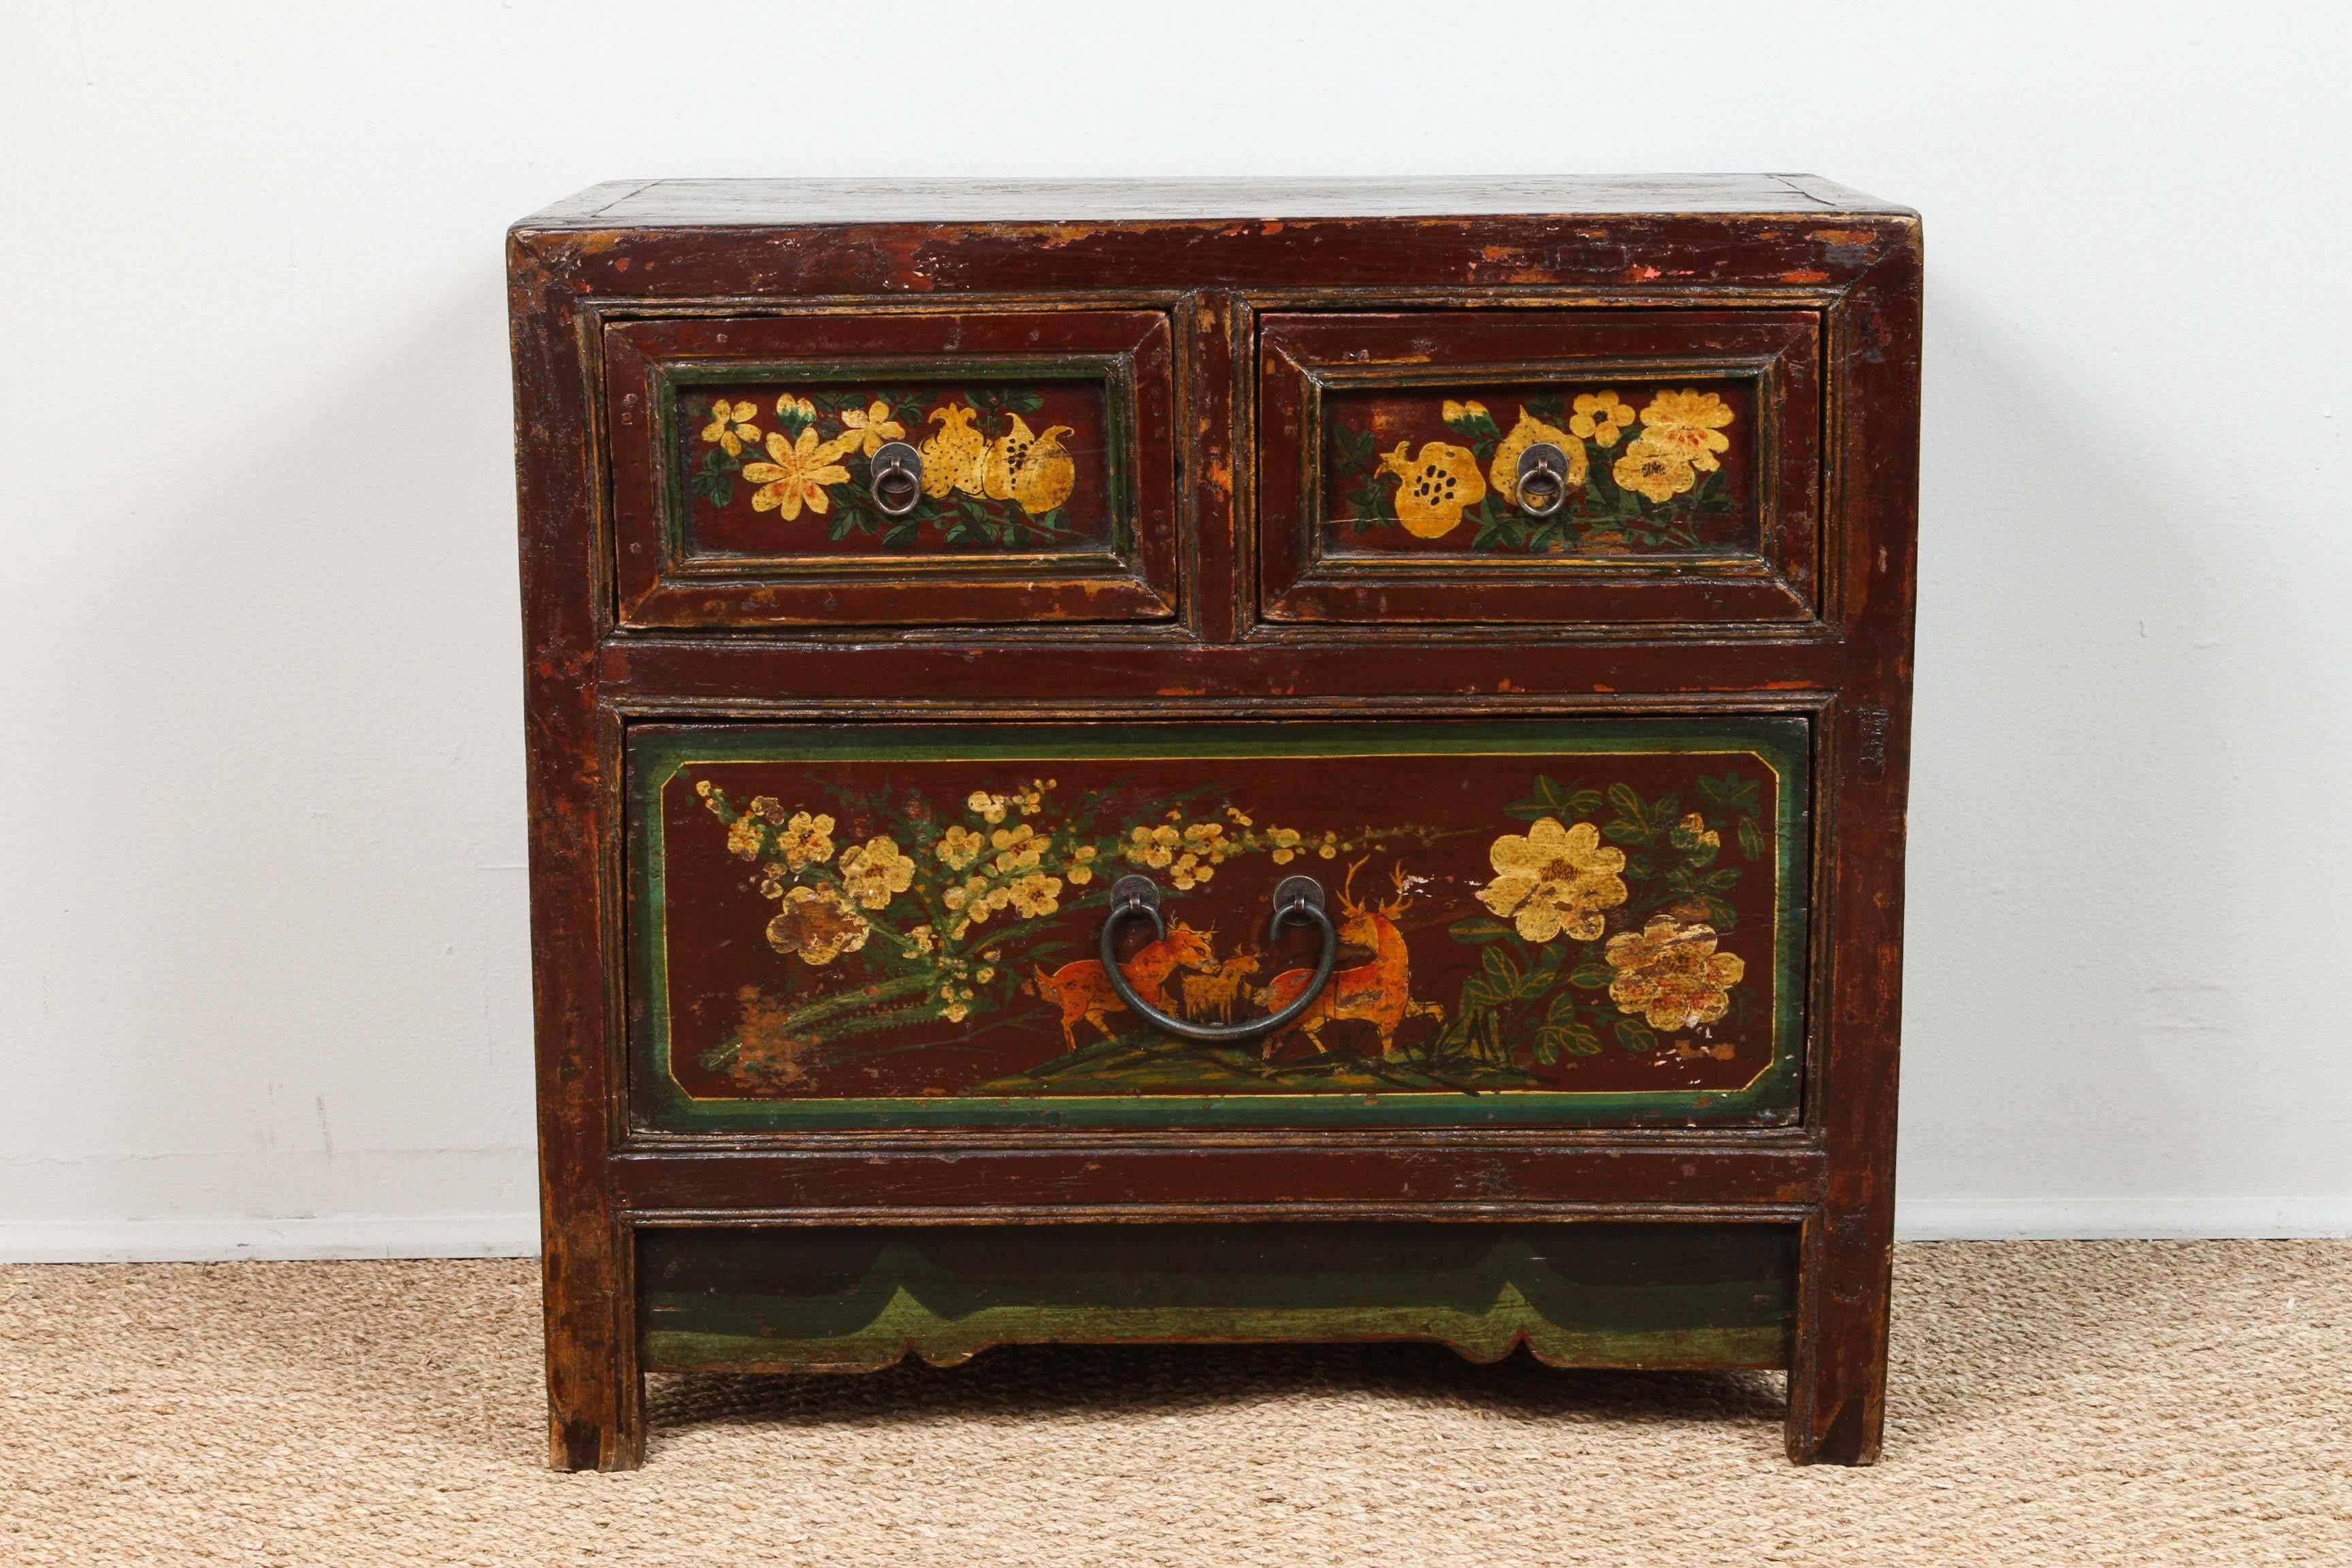 Small three-drawer chest. Flowers, fruit and three deer hand-painted motif. Warm colors. Green, yellow, orange and brown. Original hardware. Sturdy condition with slightly distressed finish.